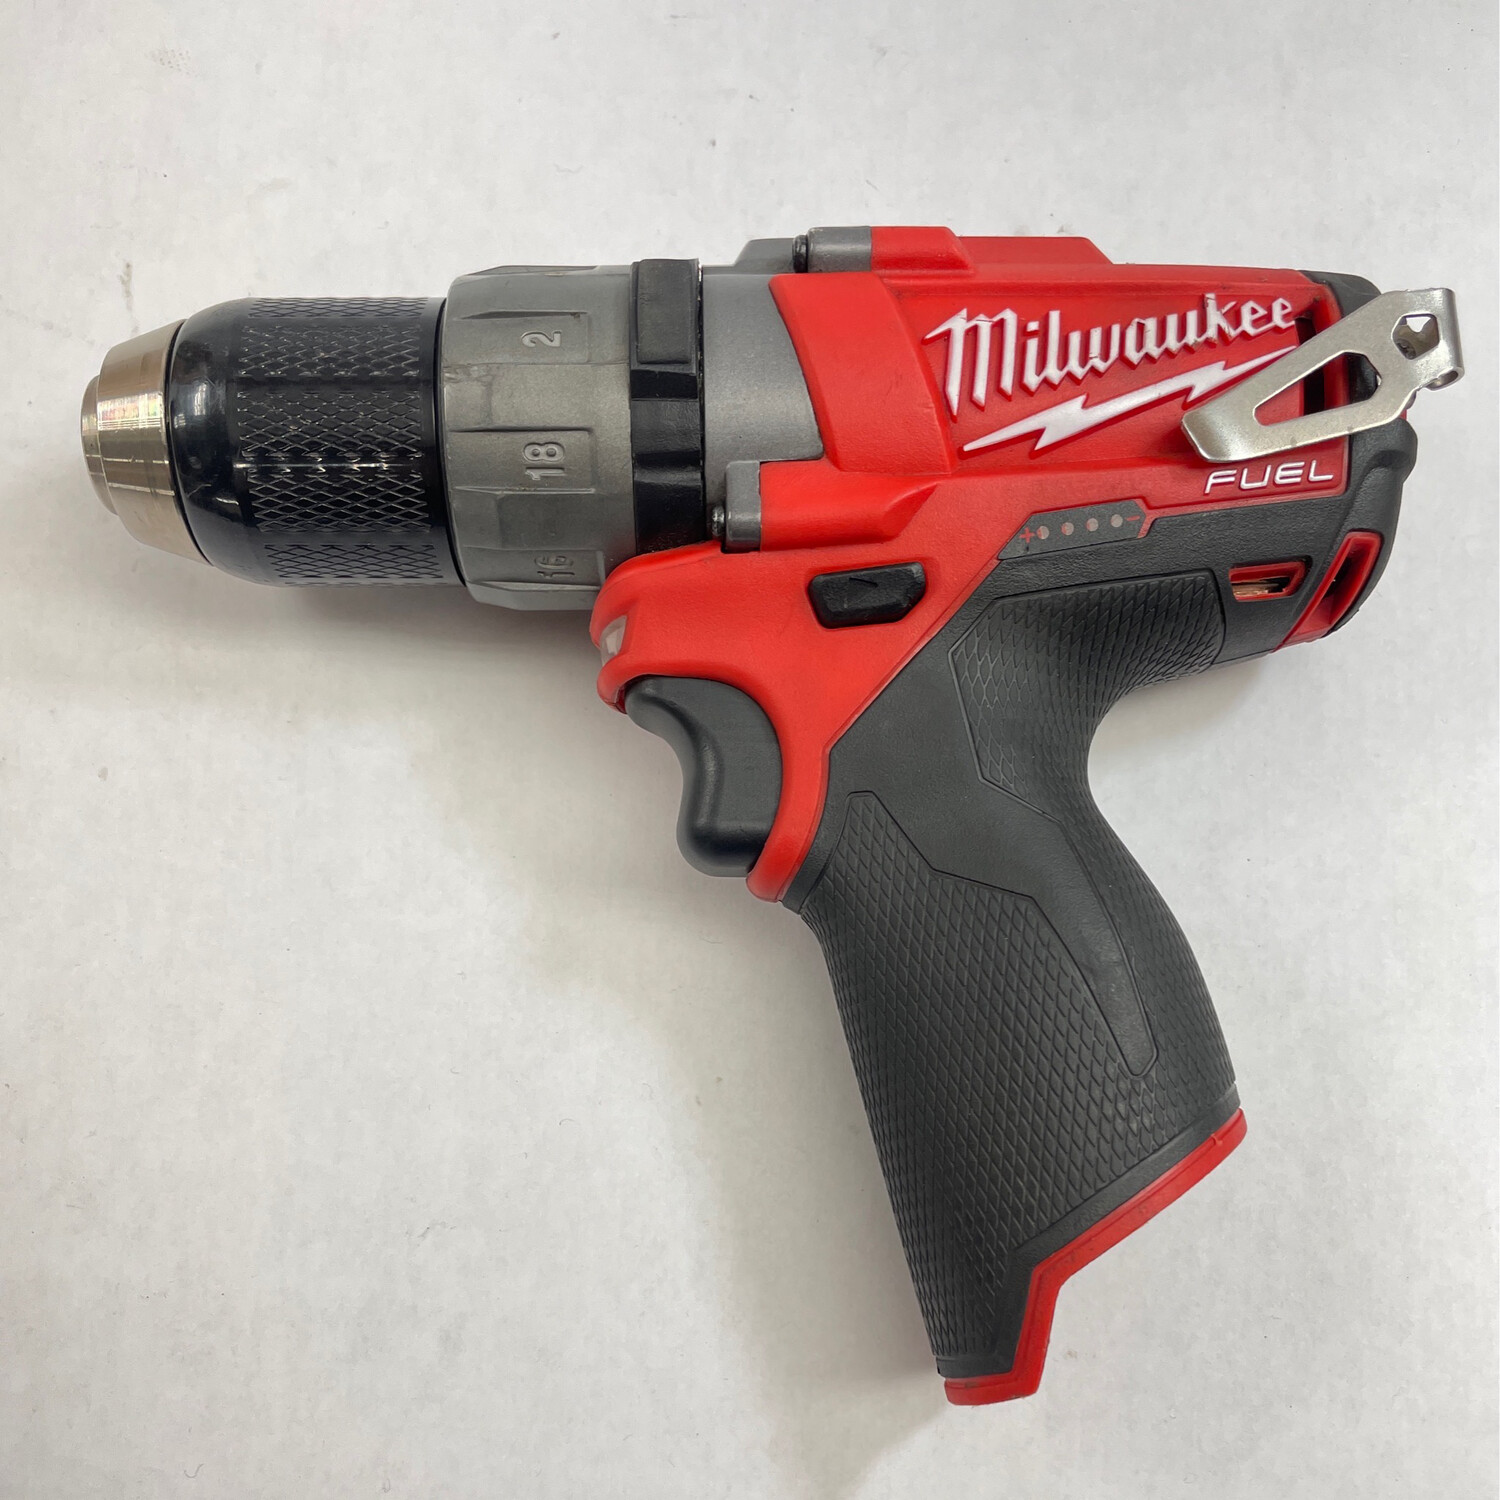 Milwaukee M12 Fuel 1/2” Drill/Driver (Tool Only) 2403-20